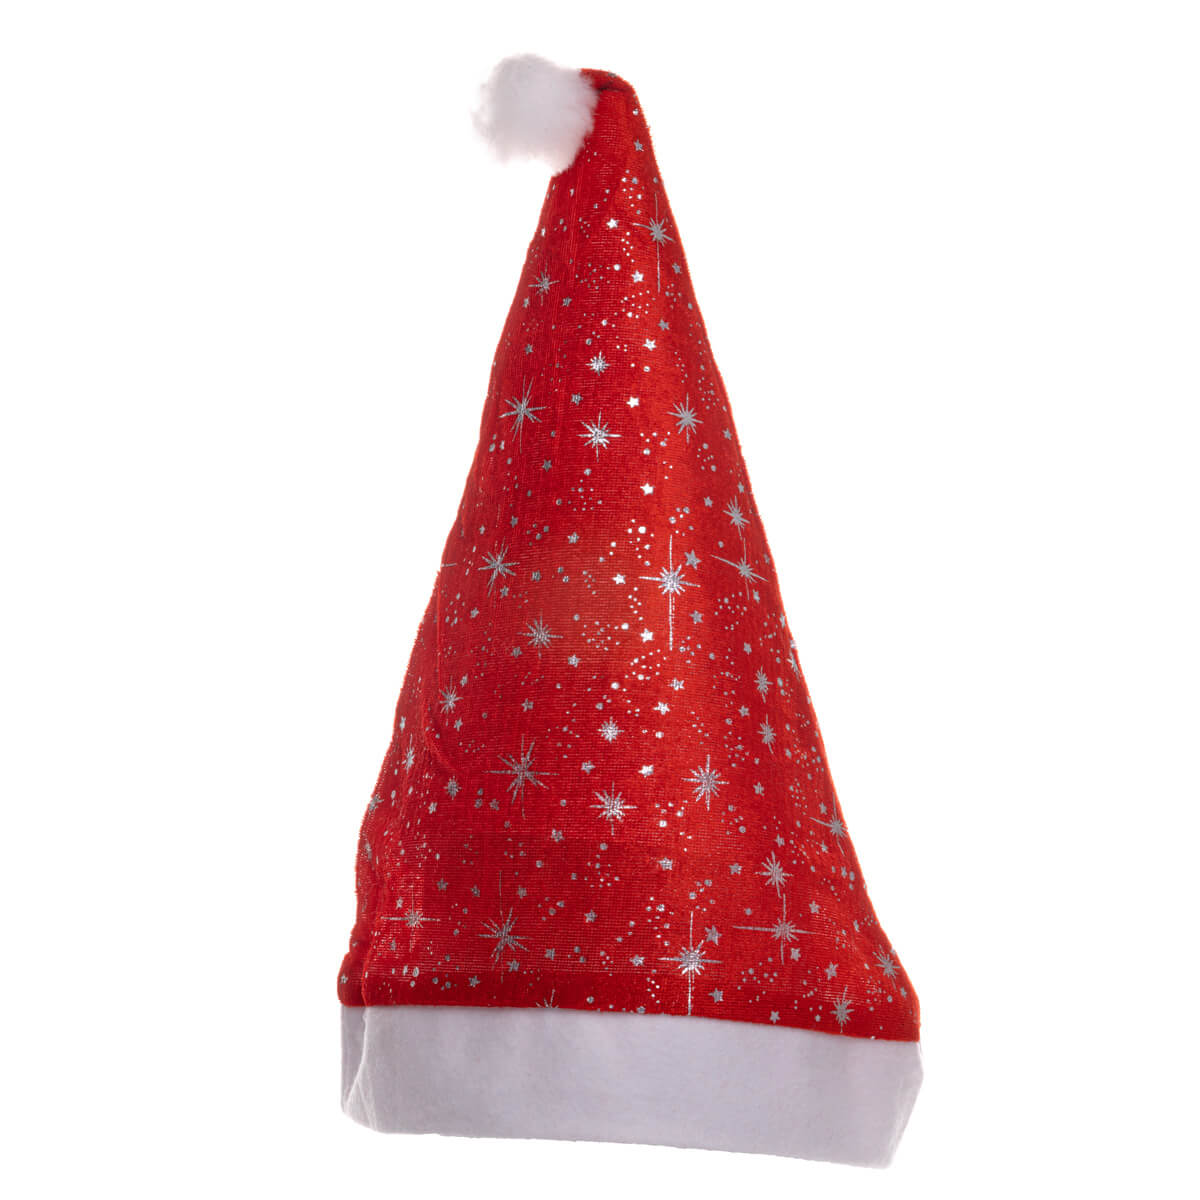 Red elfin cap with star pattern